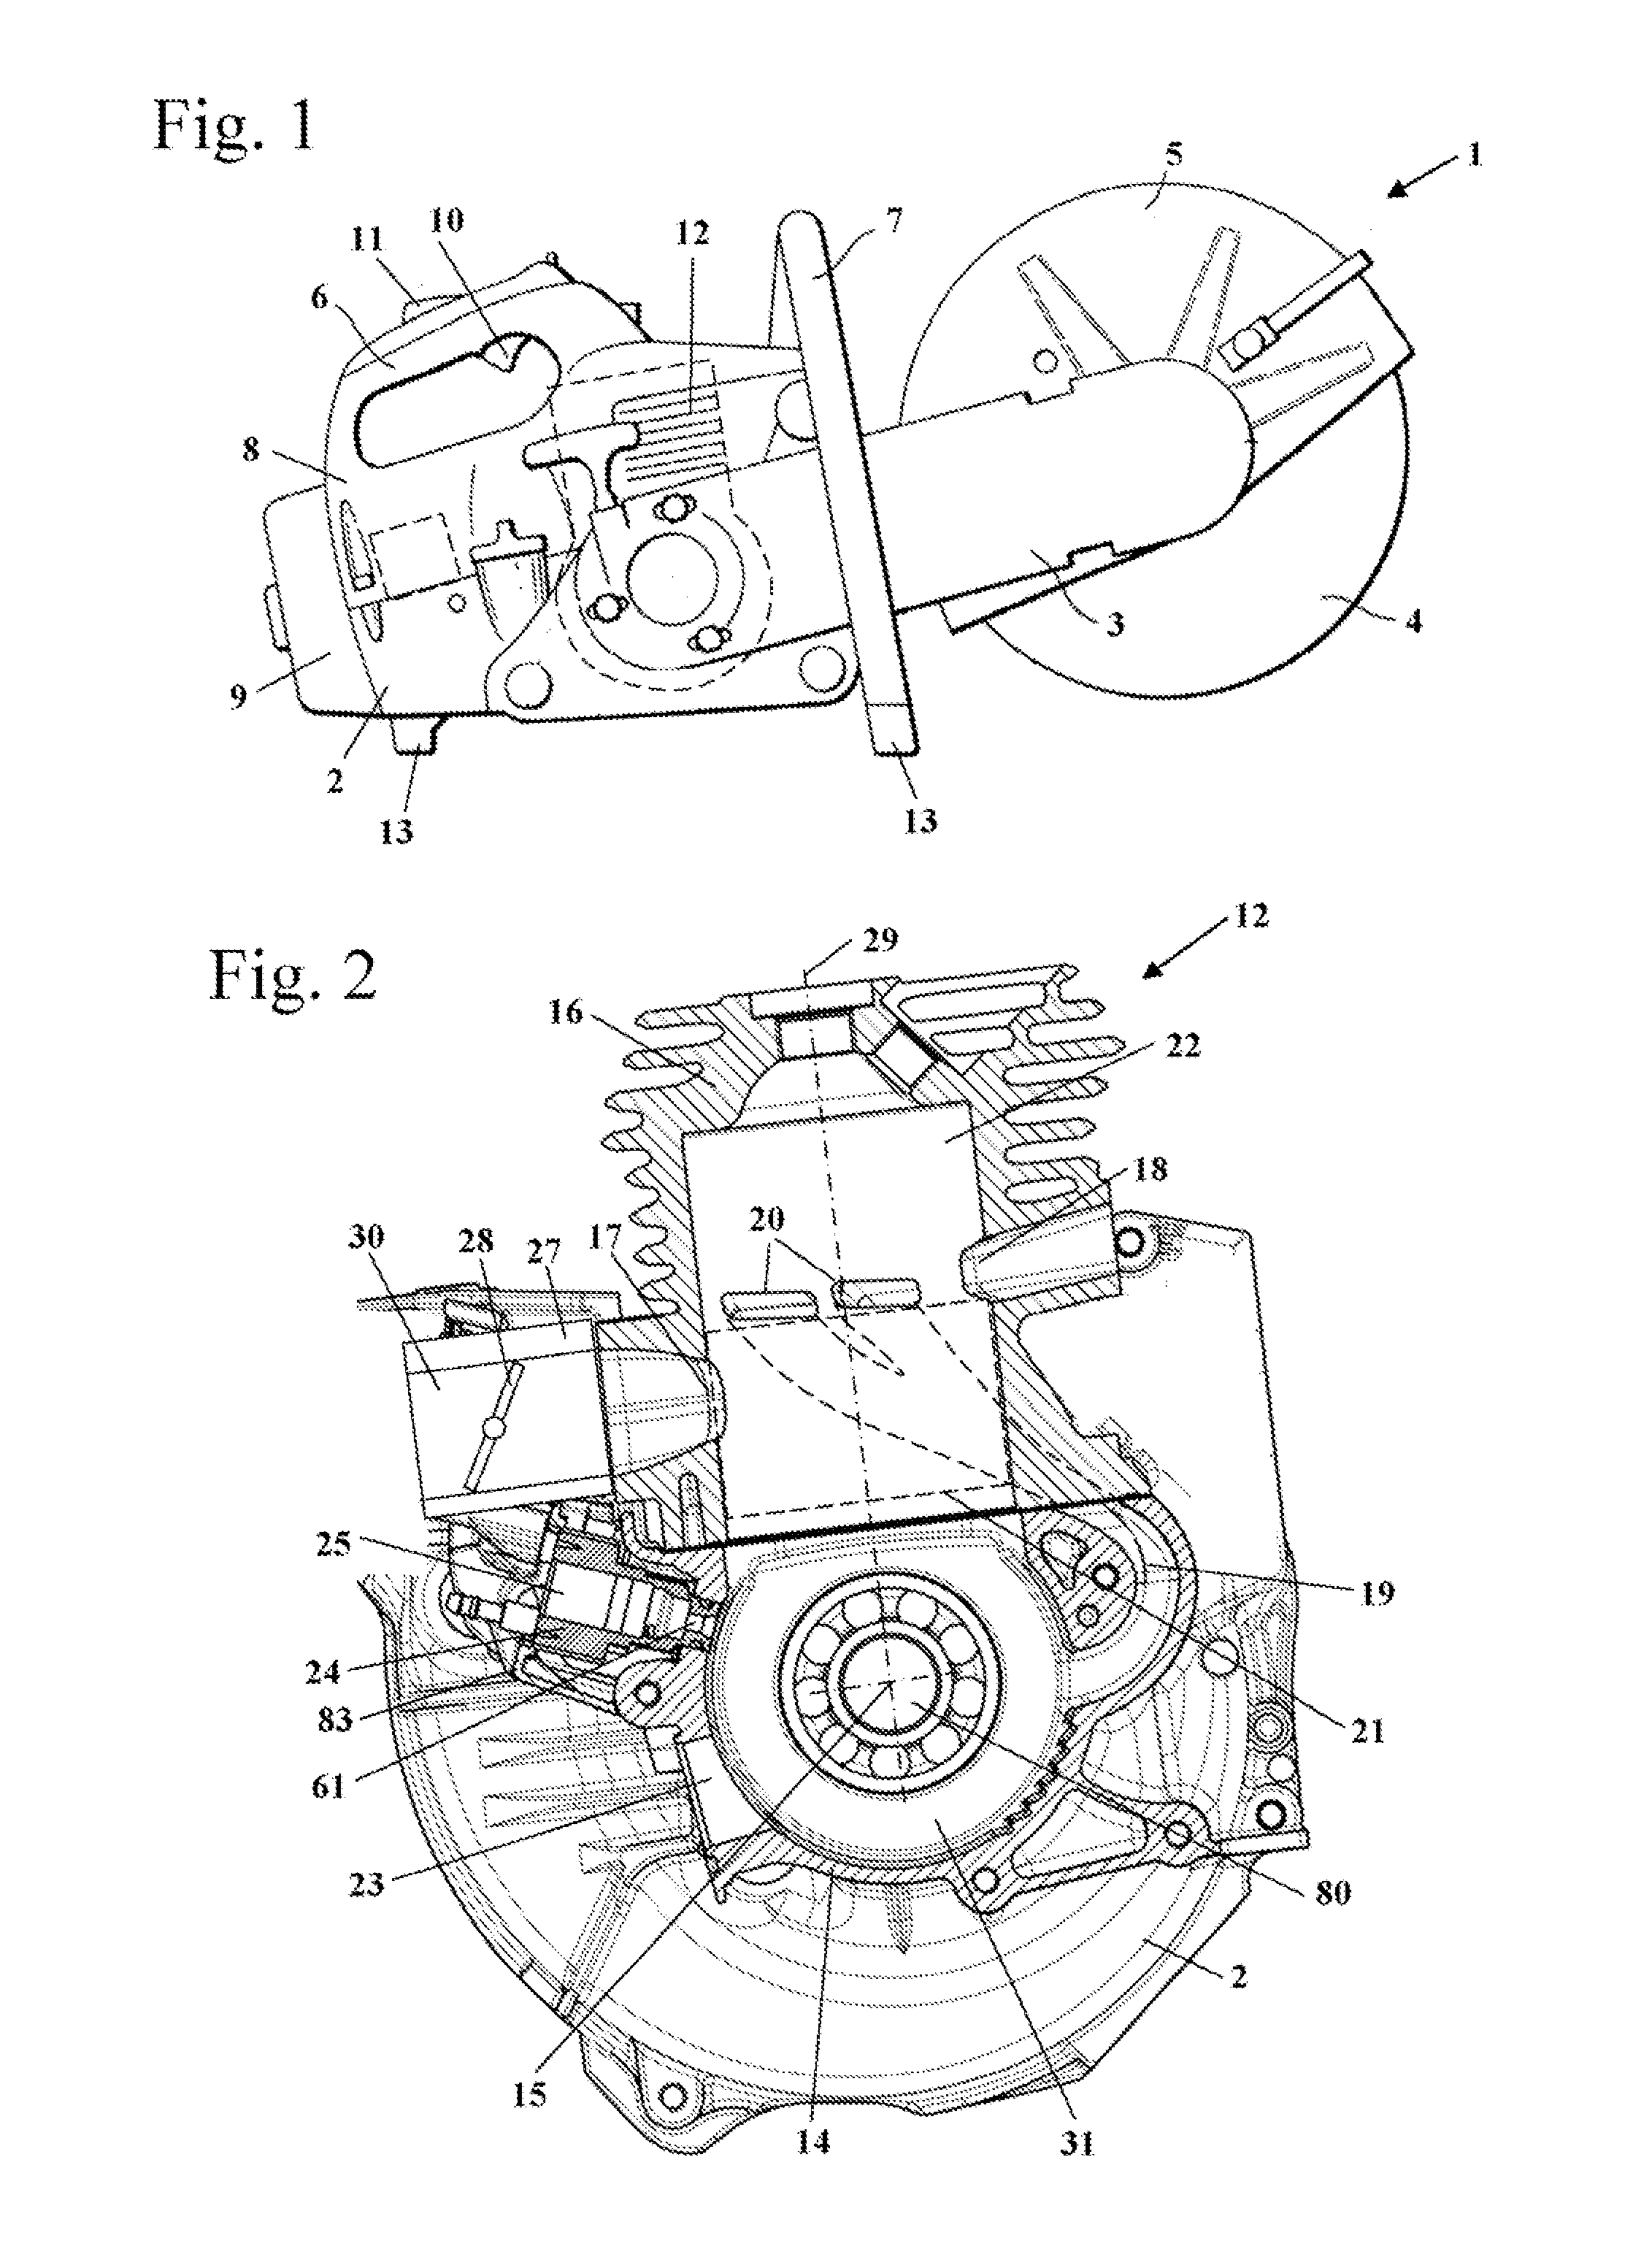 Internal combustion engine with fuel system